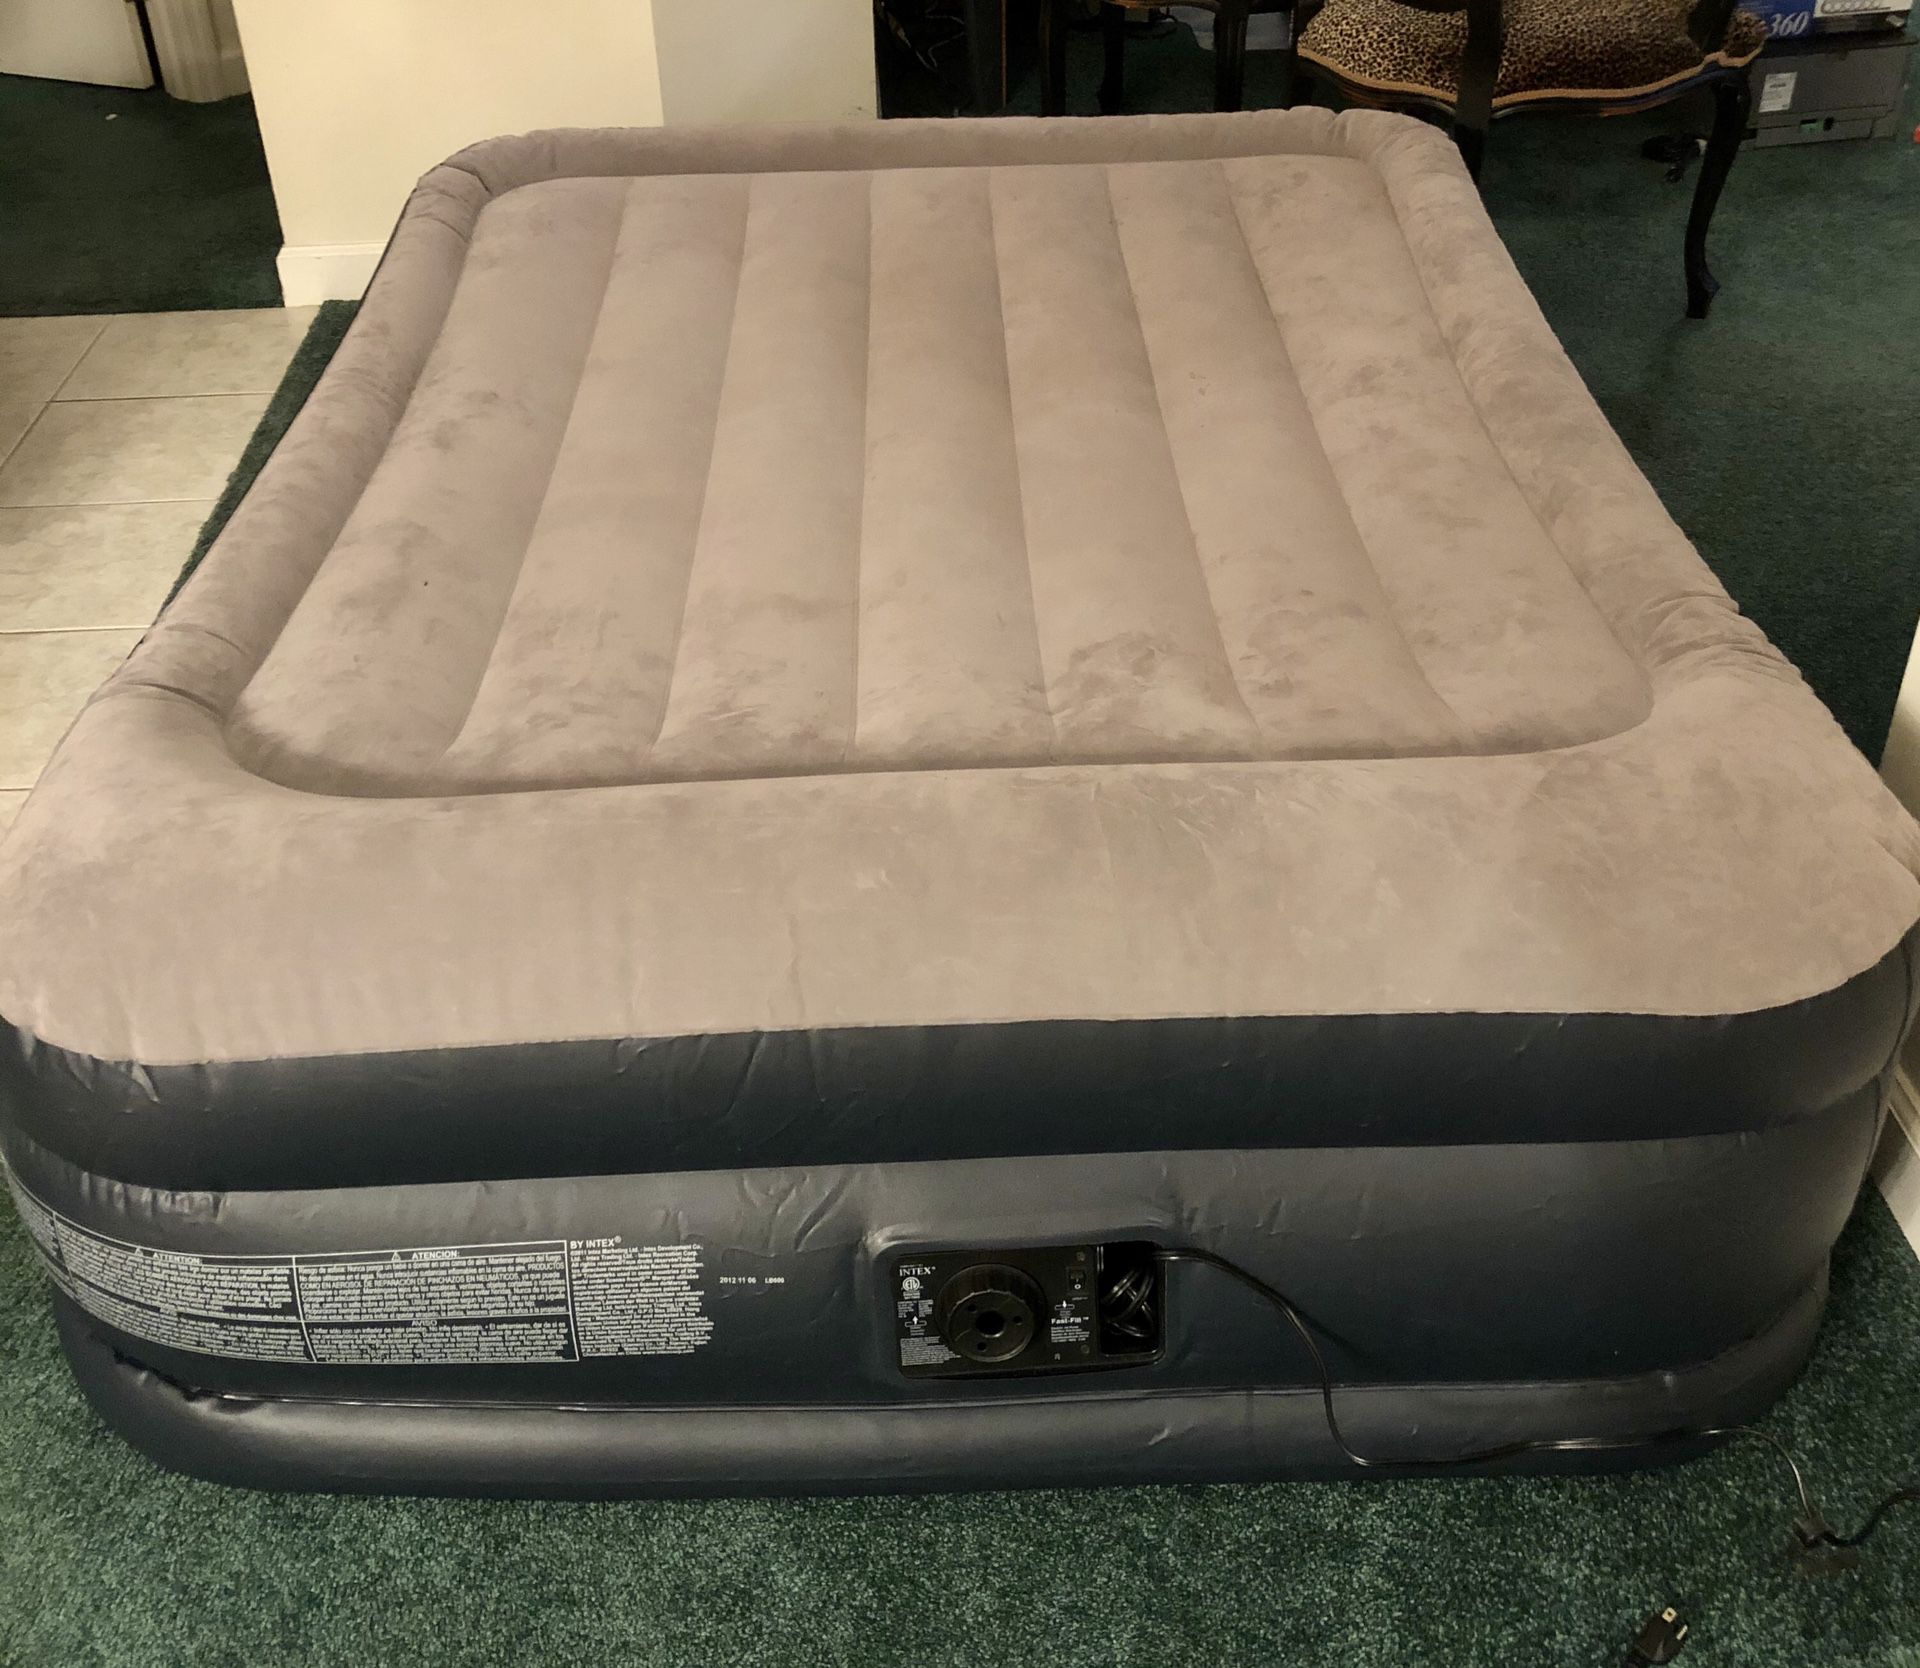 Self Inflating Air / Blow Up Mattress - Full Size - Like New